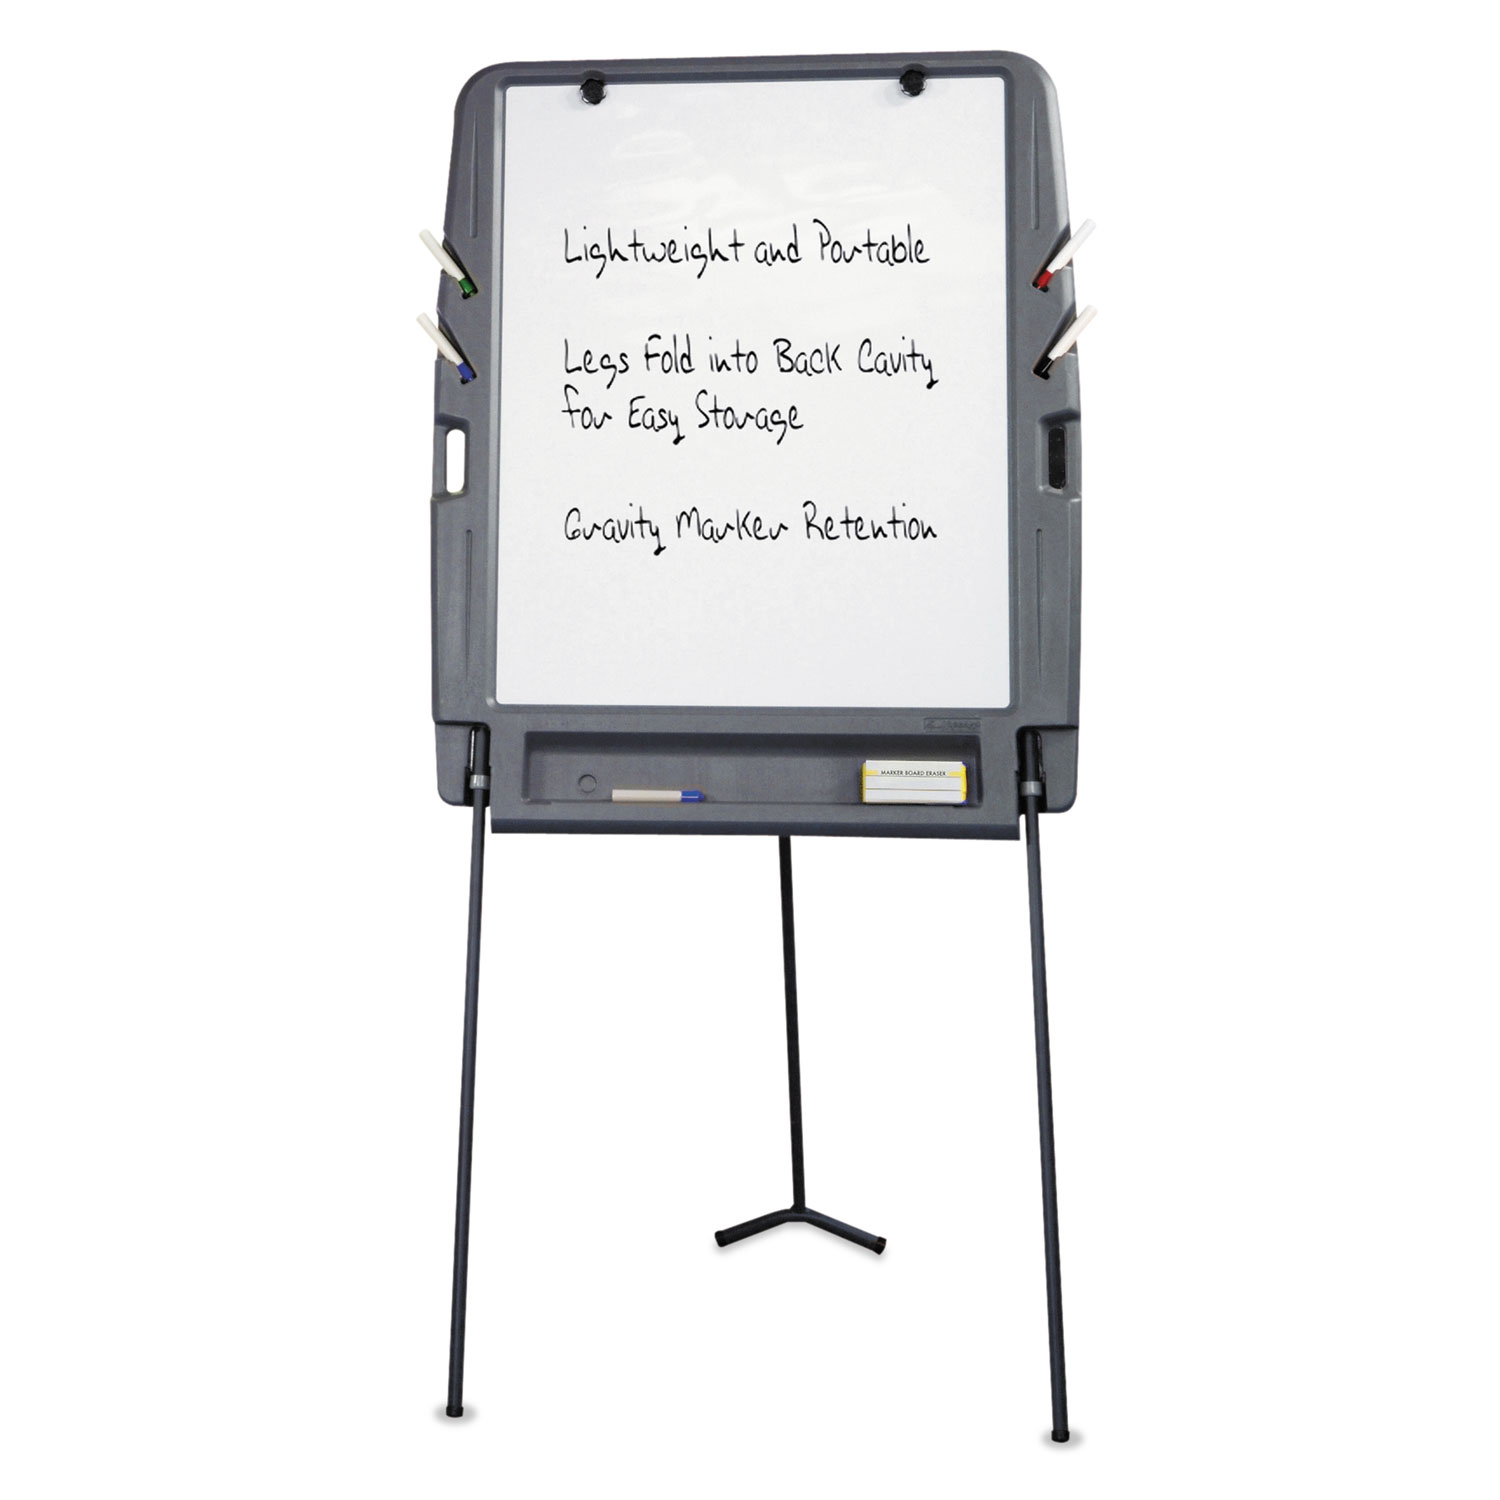  Iceberg 30227 Portable Flipchart Easel With Dry Erase Surface, Resin, 35 x 30 x 73, Charcoal (ICE30227) 